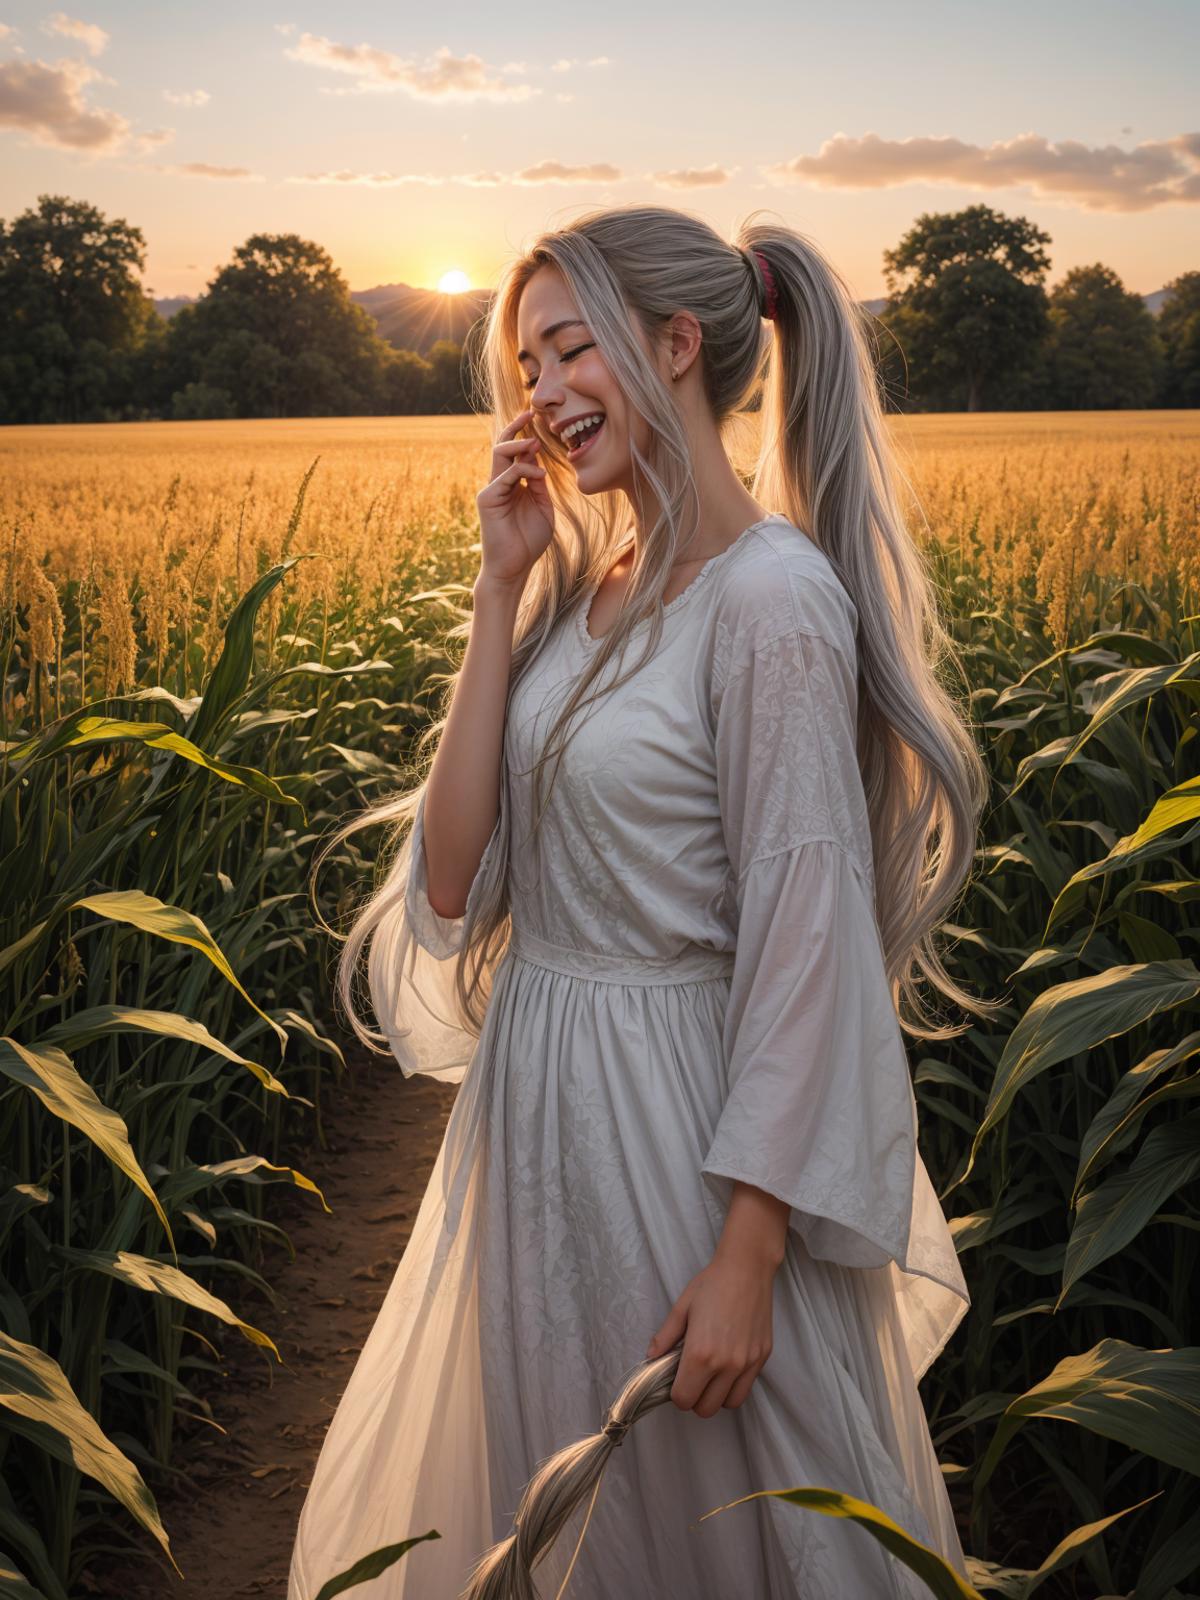 Woman in a white dress wearing silver pigtails and laughing while holding a cell phone.